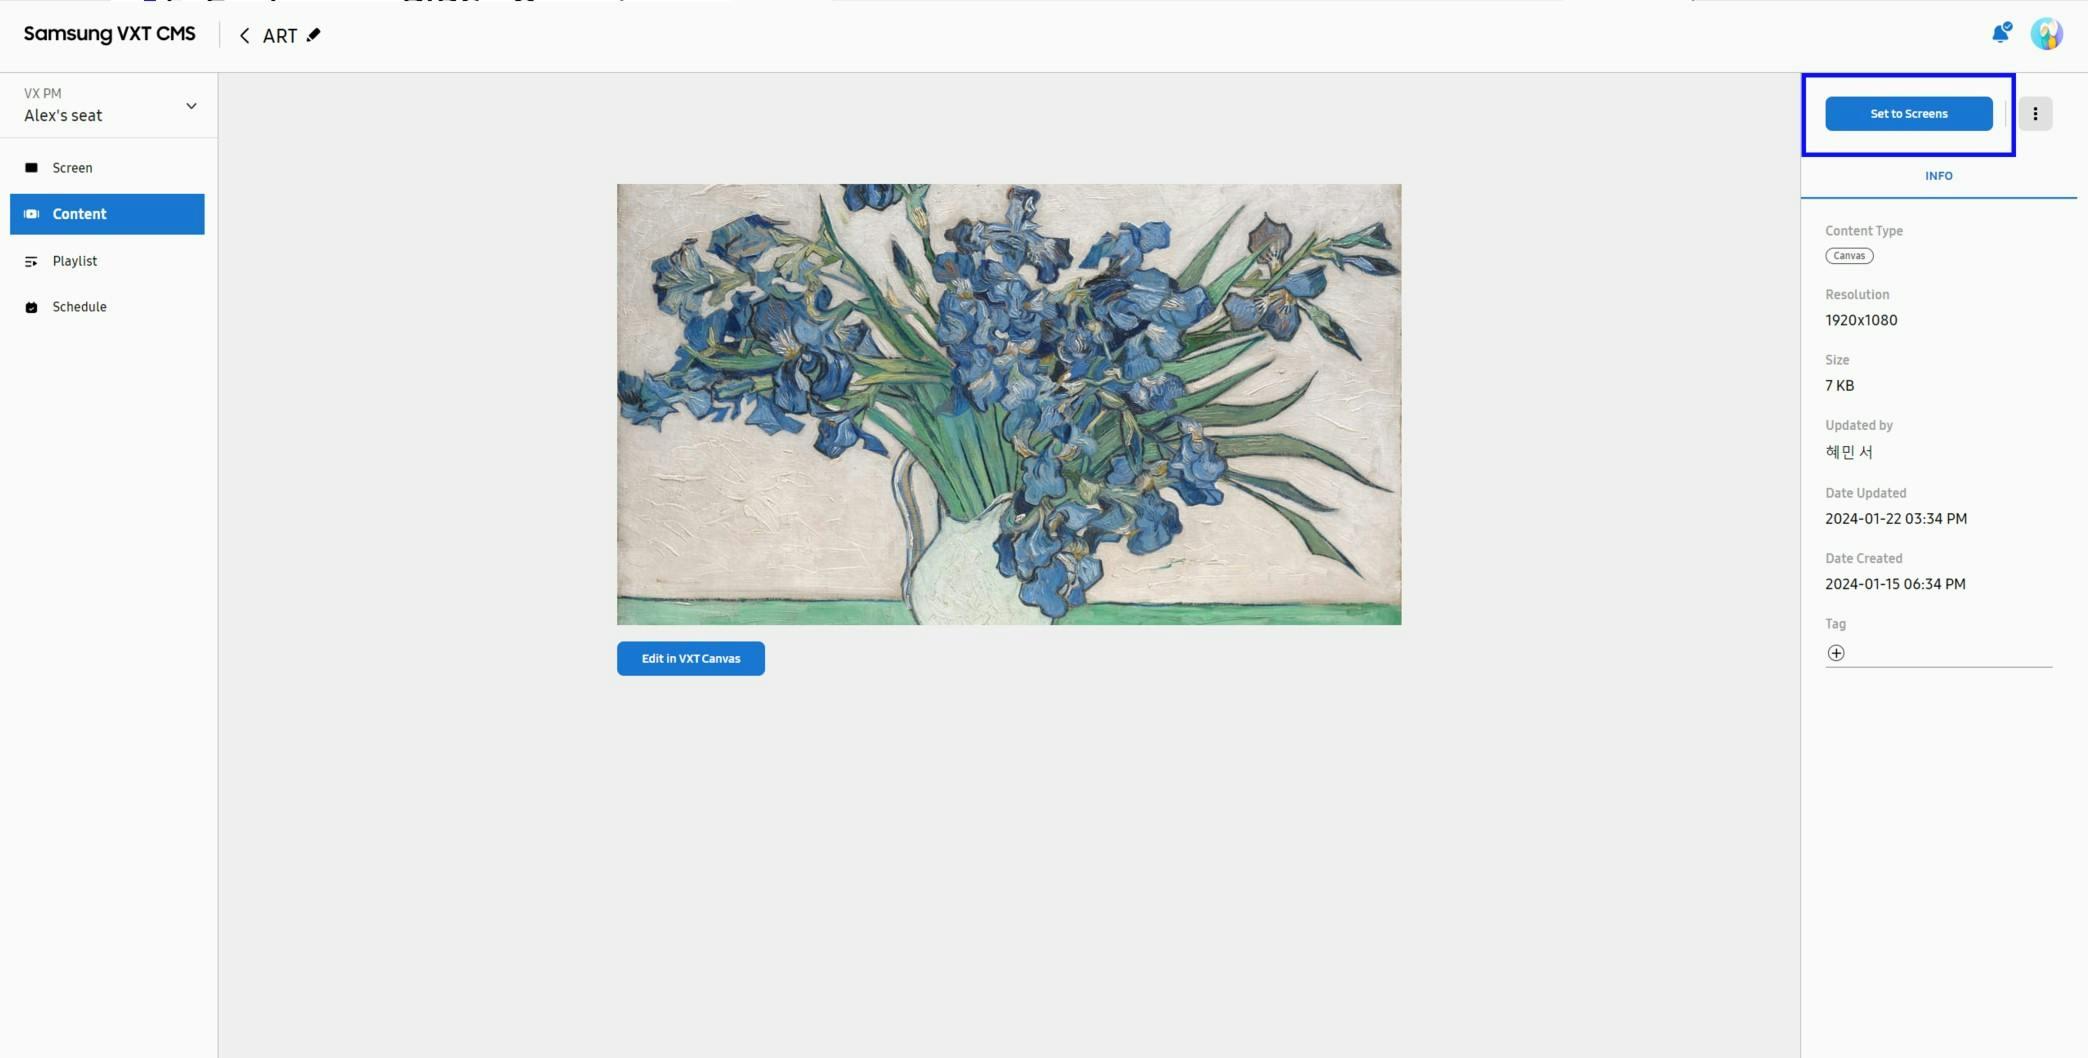 Samsung VXT CMS backend showing easy deployment of art content of flowers in a vase